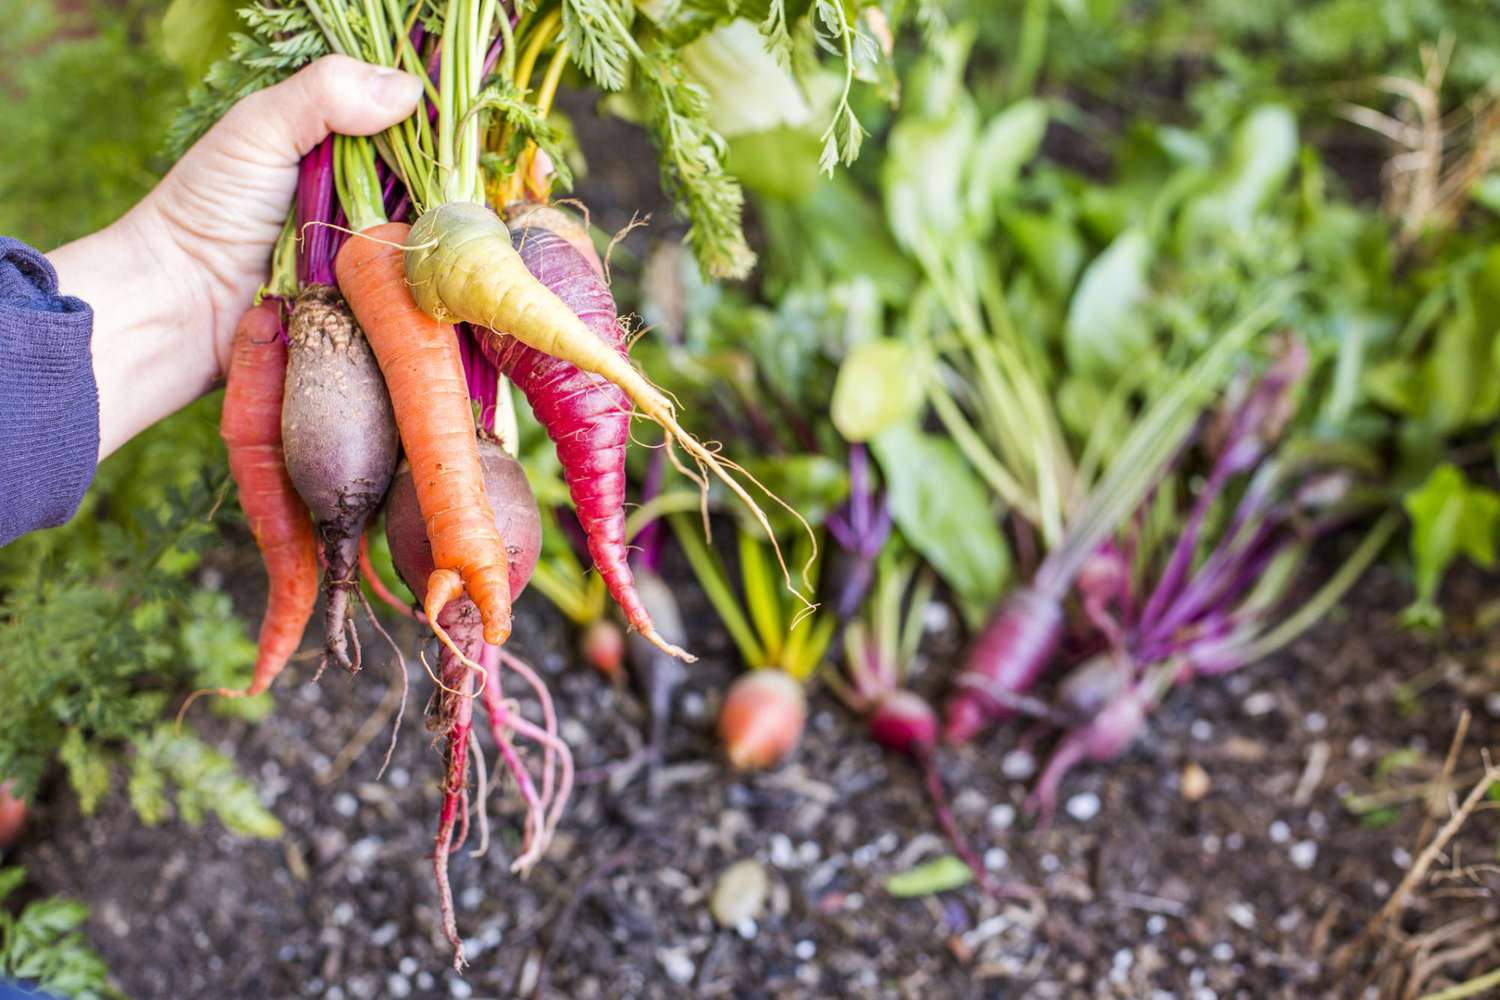 Organic Gardening: Planting Root Vegetables in Raised Beds in the Spring